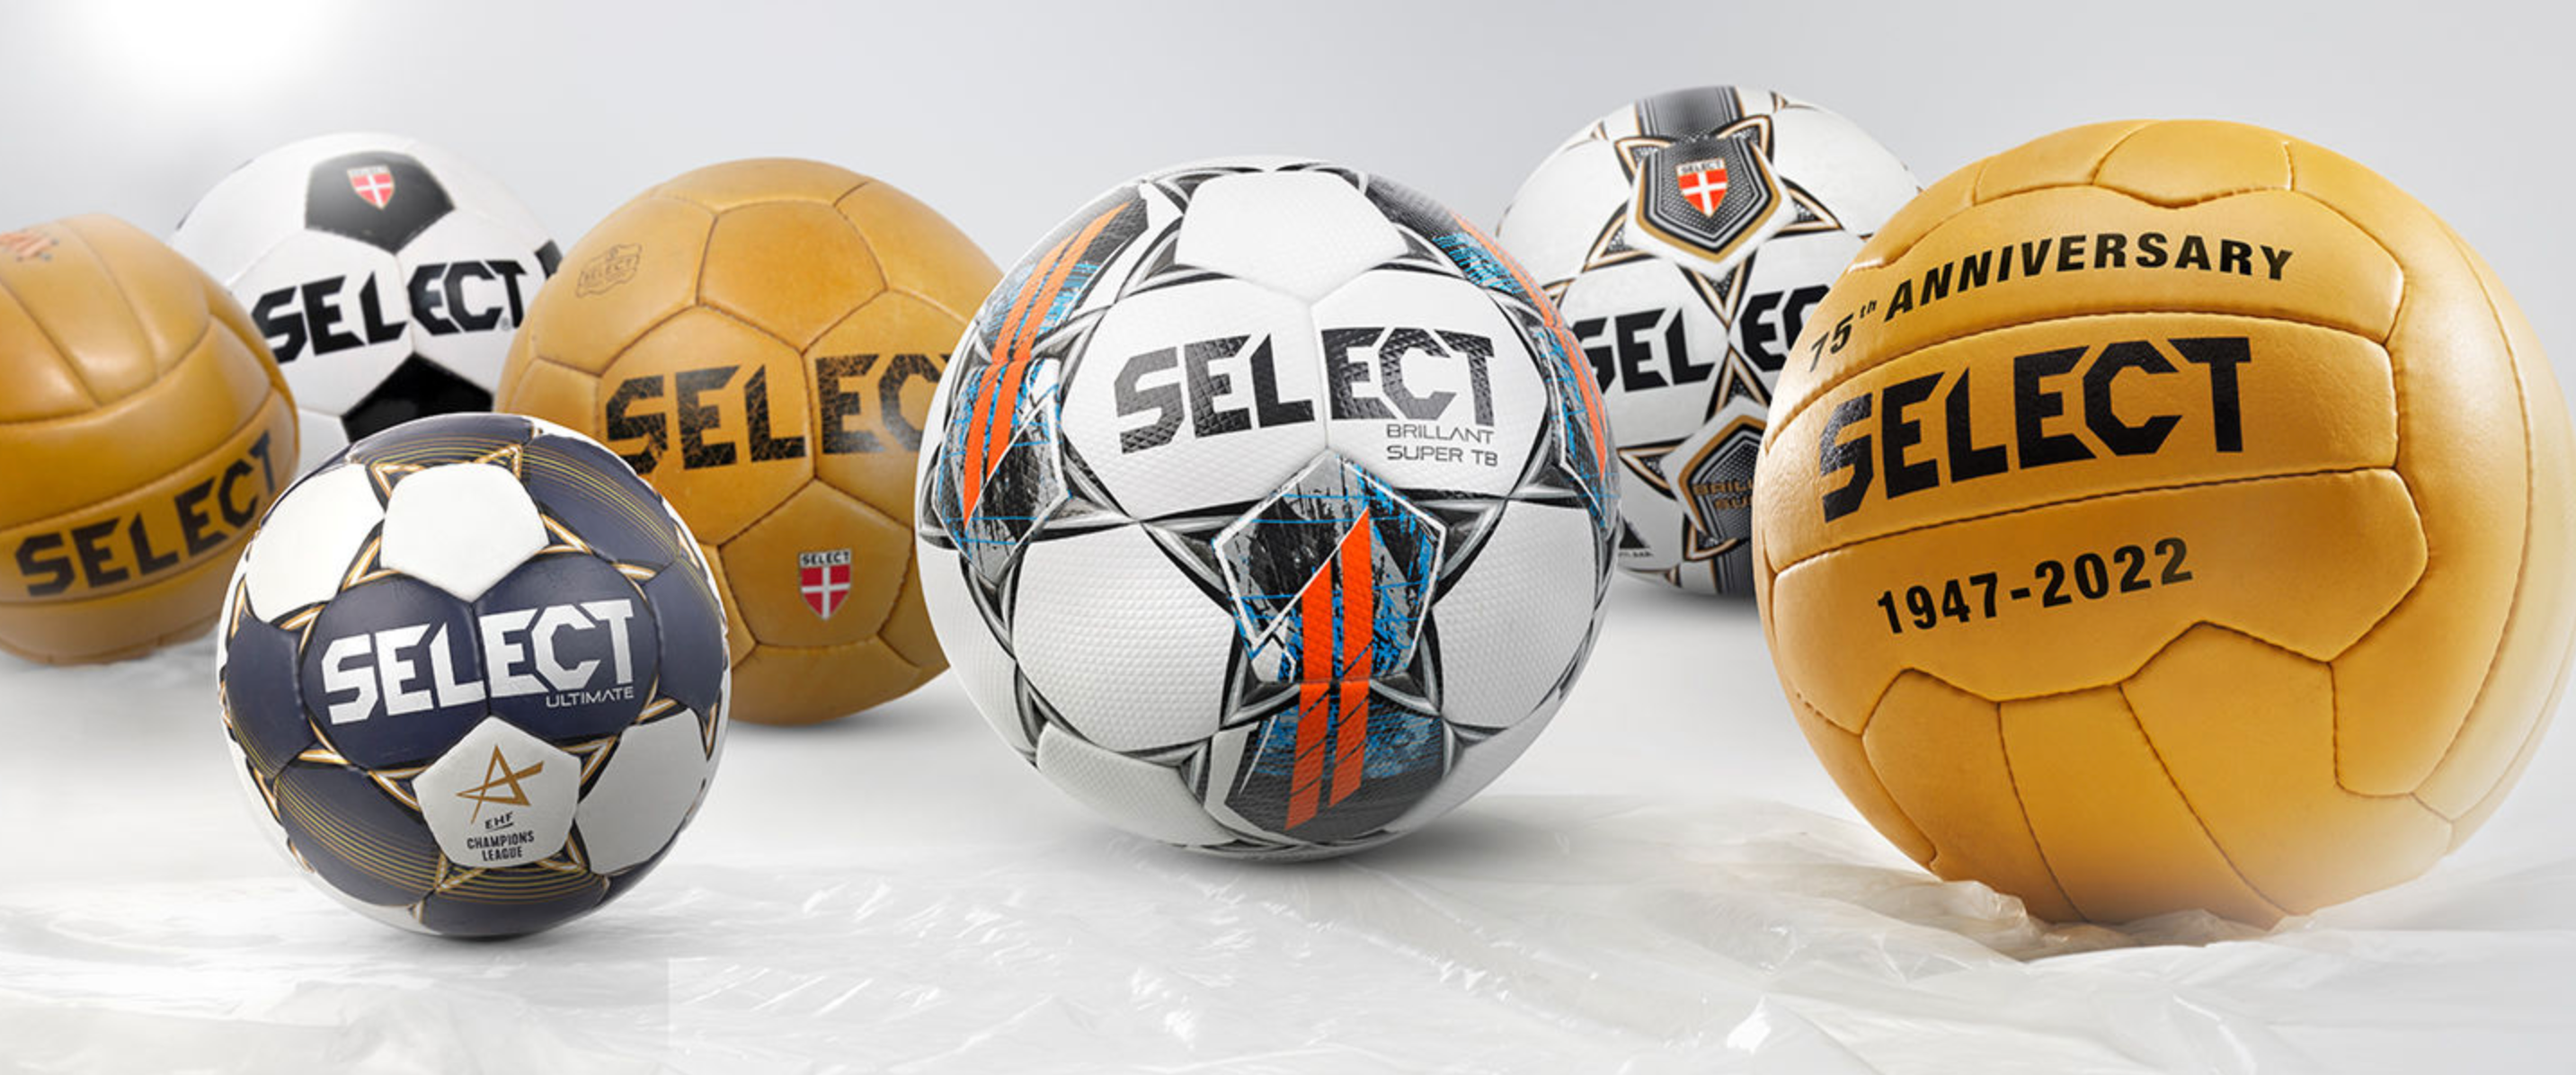 Everything For Your Club - Your ball specialist | Chef Select